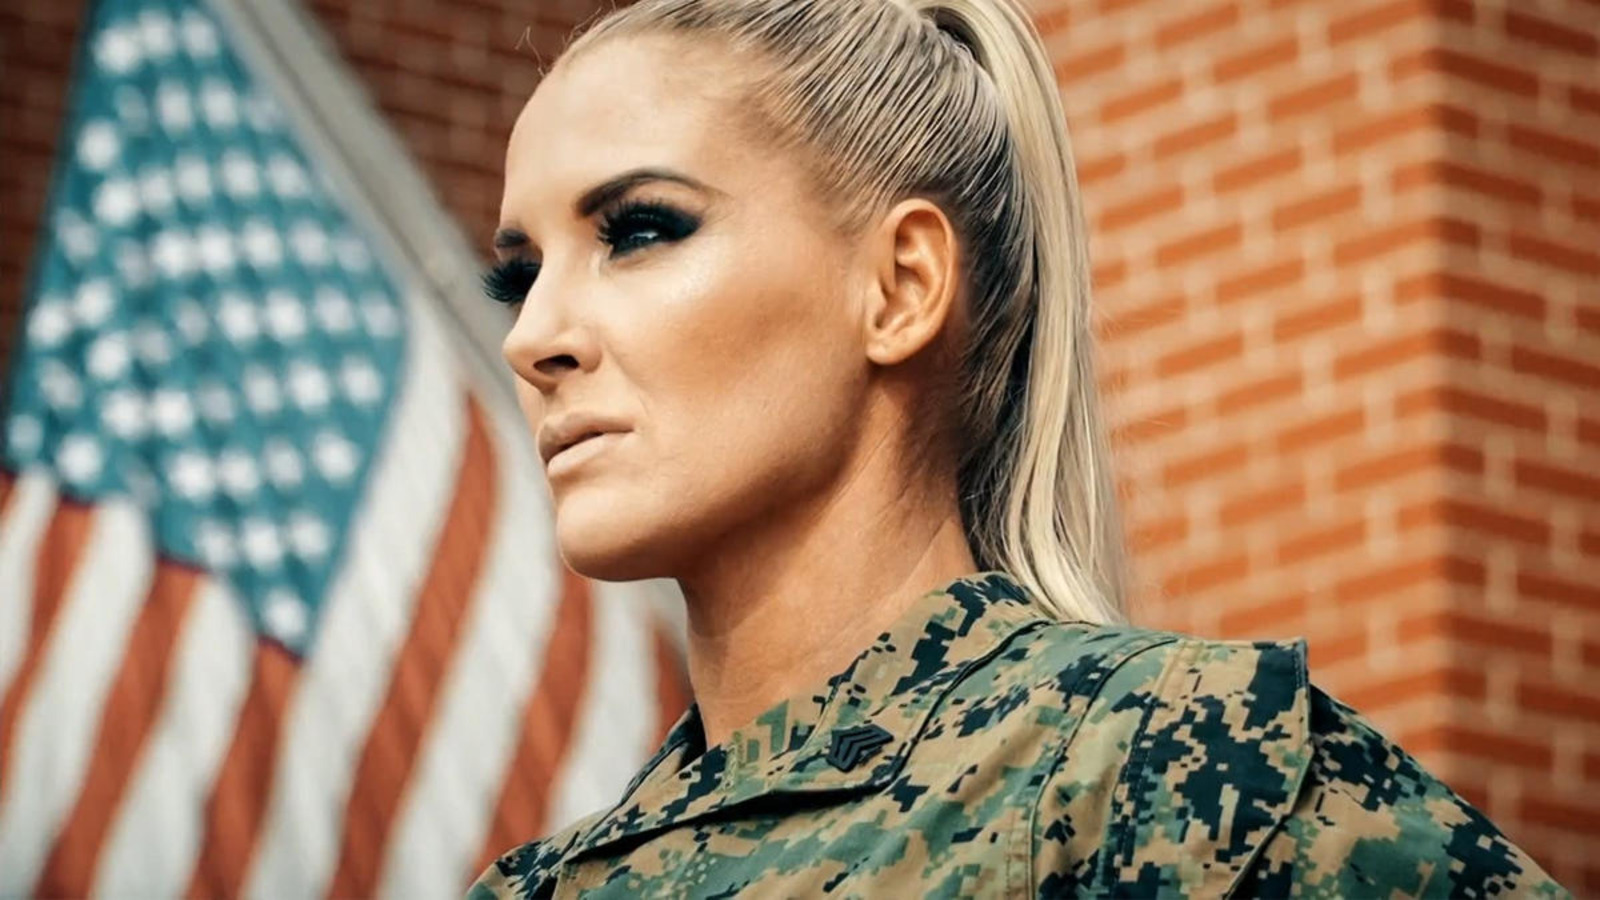 Sgt. Slaughter's Daughter Says WWE Asked Her Dad To Manage Lacey Evans